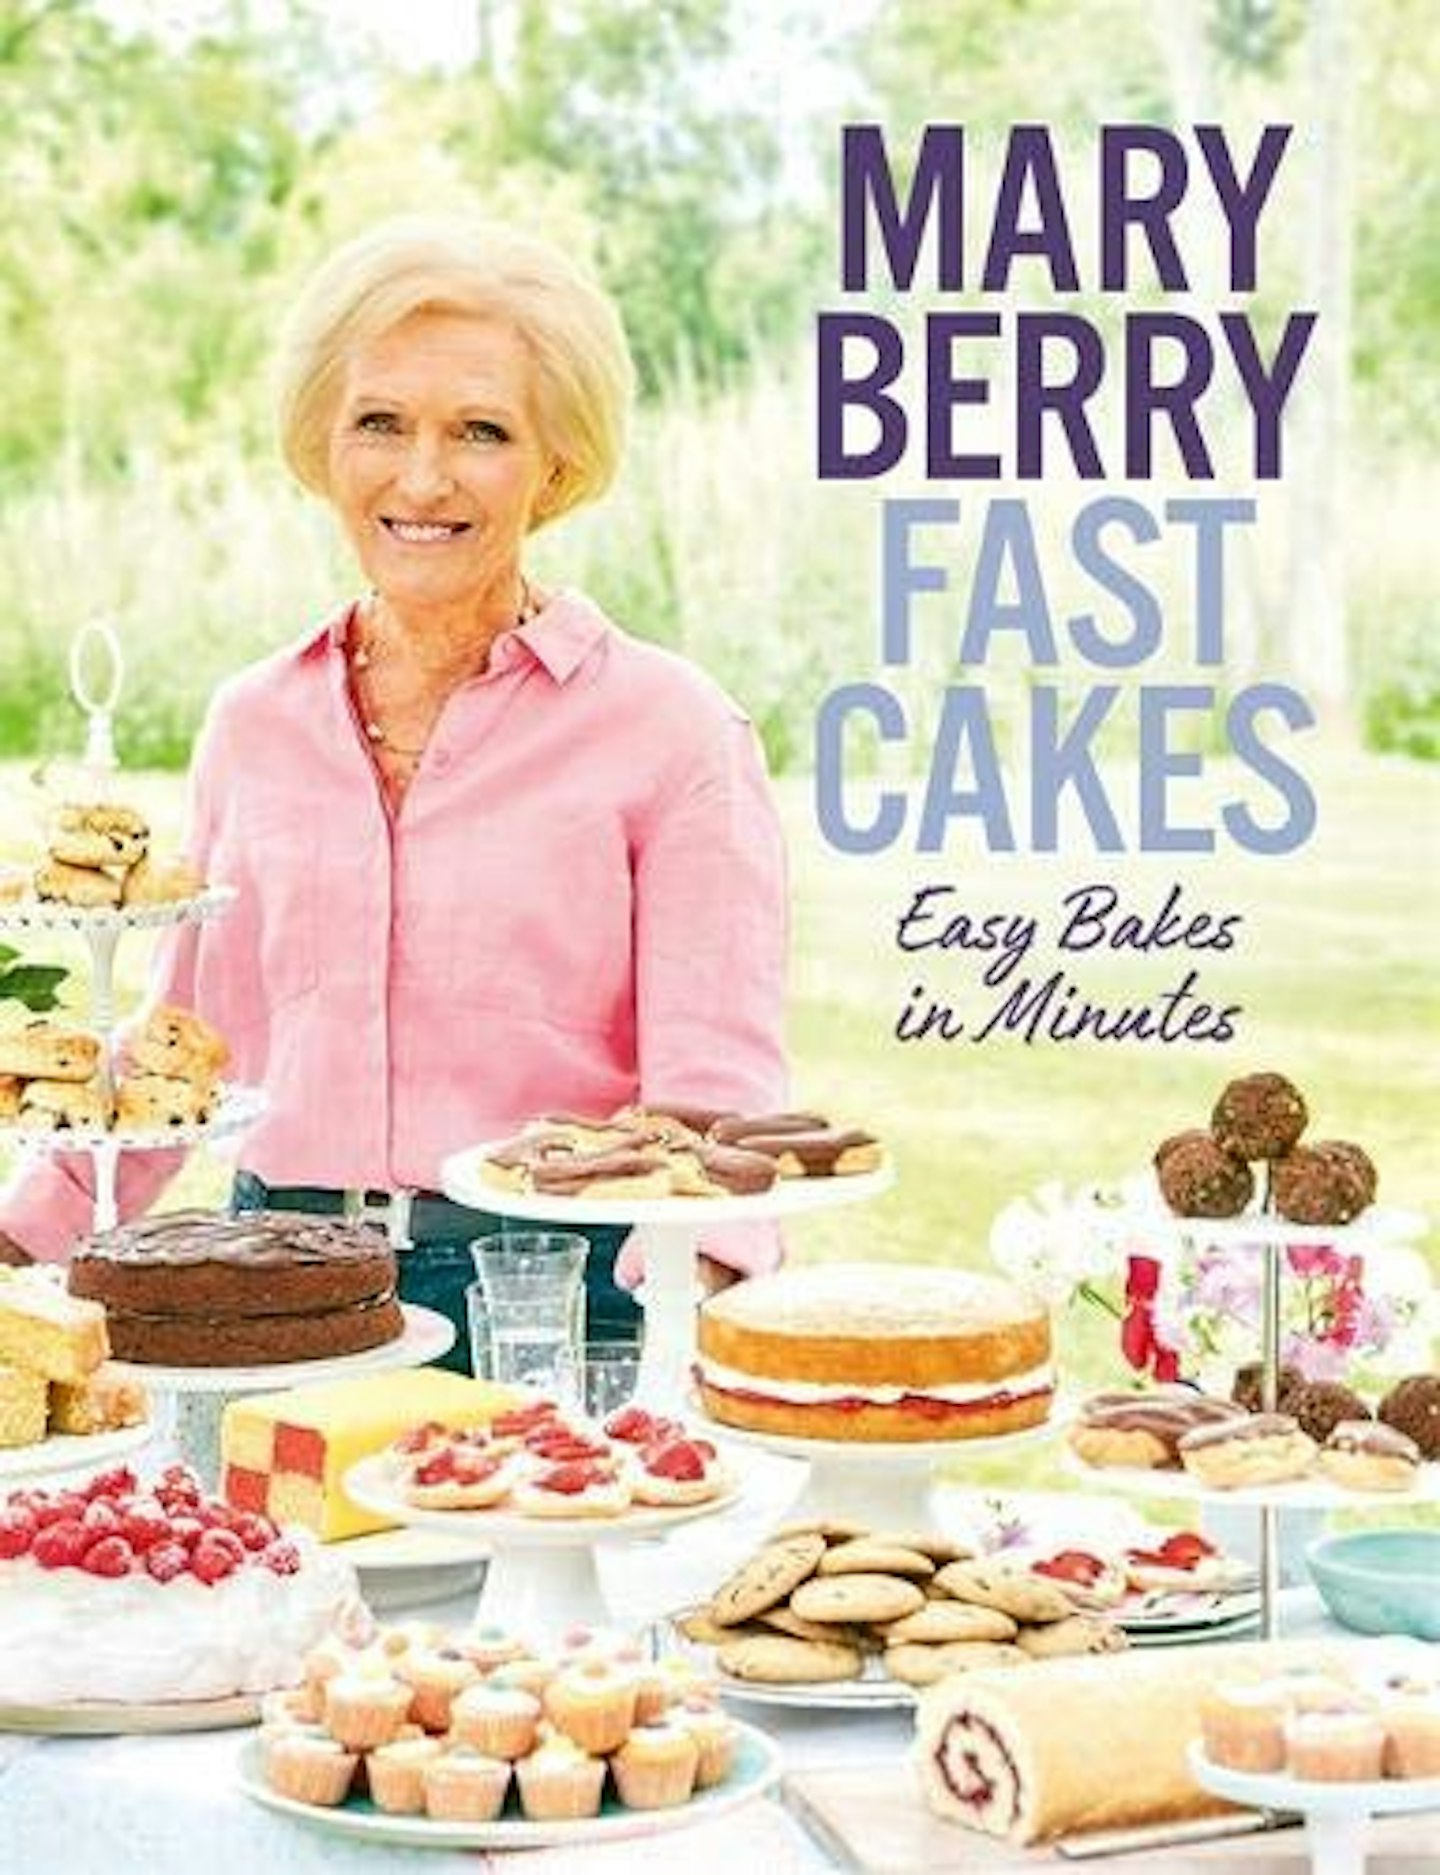 Fast Cakes: Easy bakes in minutes, 19.51